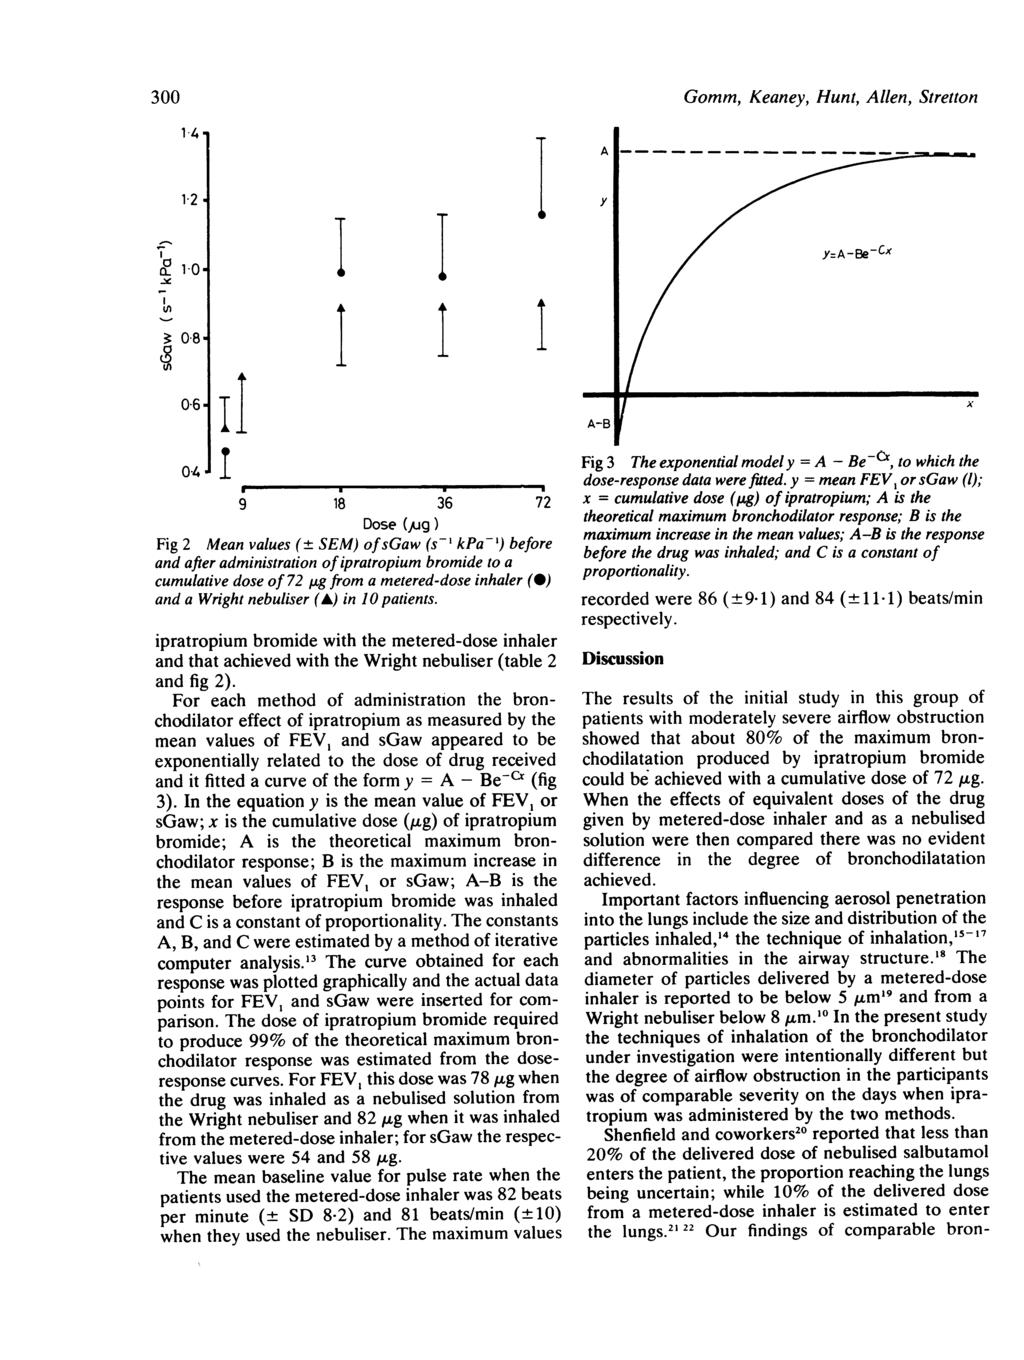 300 141 1 2 _ og 10 un 1-3 08 06 0*4 i 9 18 36 72 Dose (pug ) Fig 2 Mean values (± SEM) ofsgaw (s-' kpa-') before and after administration ofipratropium bromide to a cumulative dose of 72,g from a